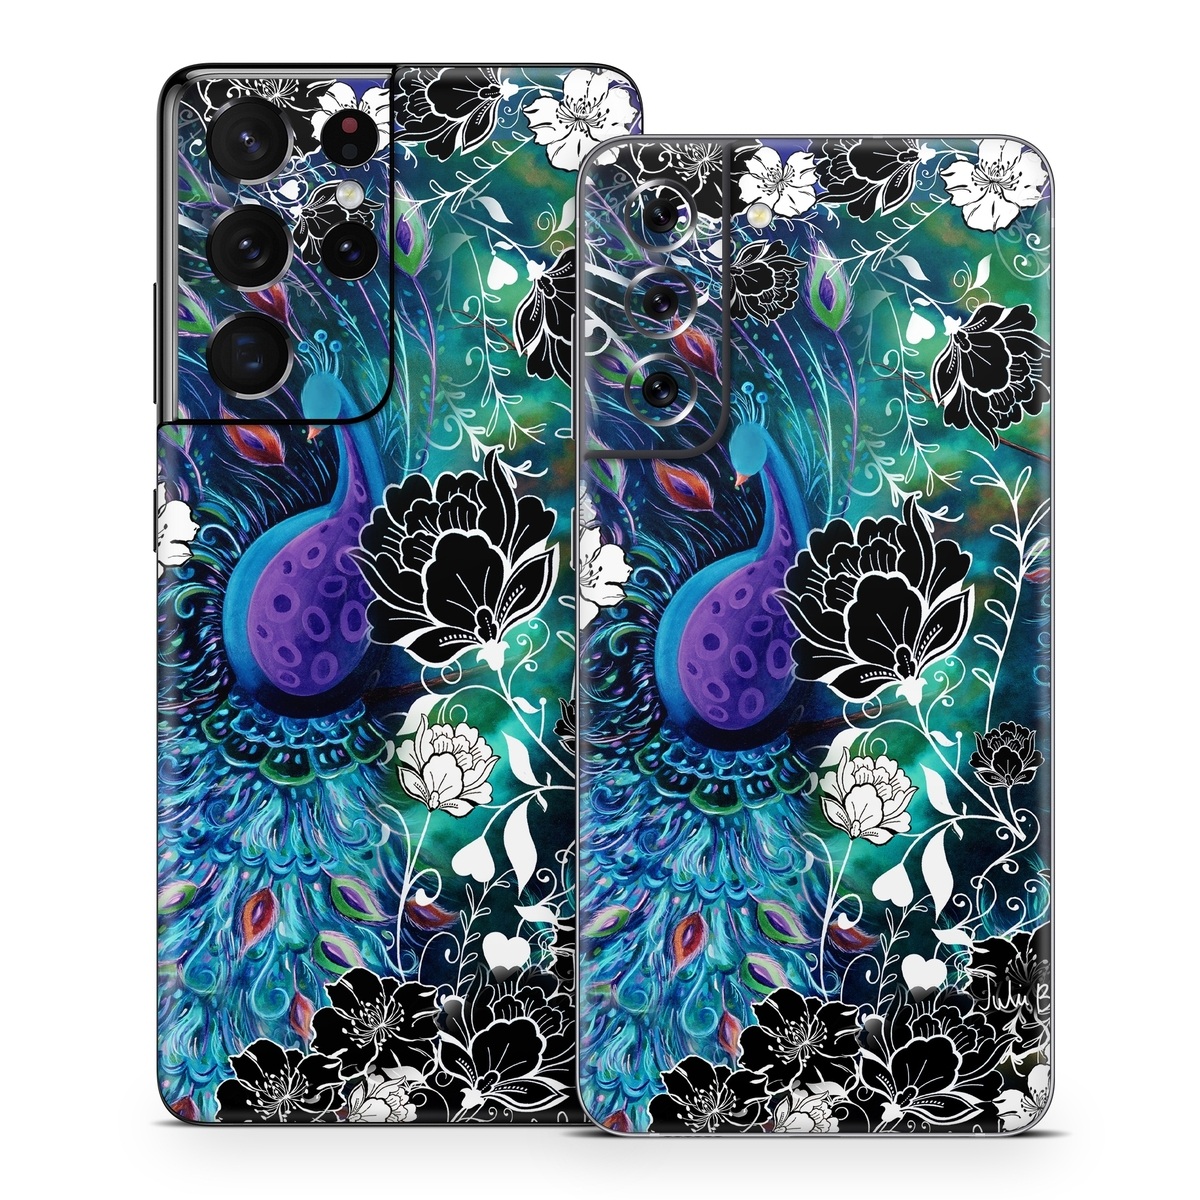 Samsung Galaxy S21 Series Skin design of Pattern, Psychedelic art, Organism, Turquoise, Purple, Graphic design, Art, Design, Illustration, Fractal art, with black, blue, gray, green, white colors